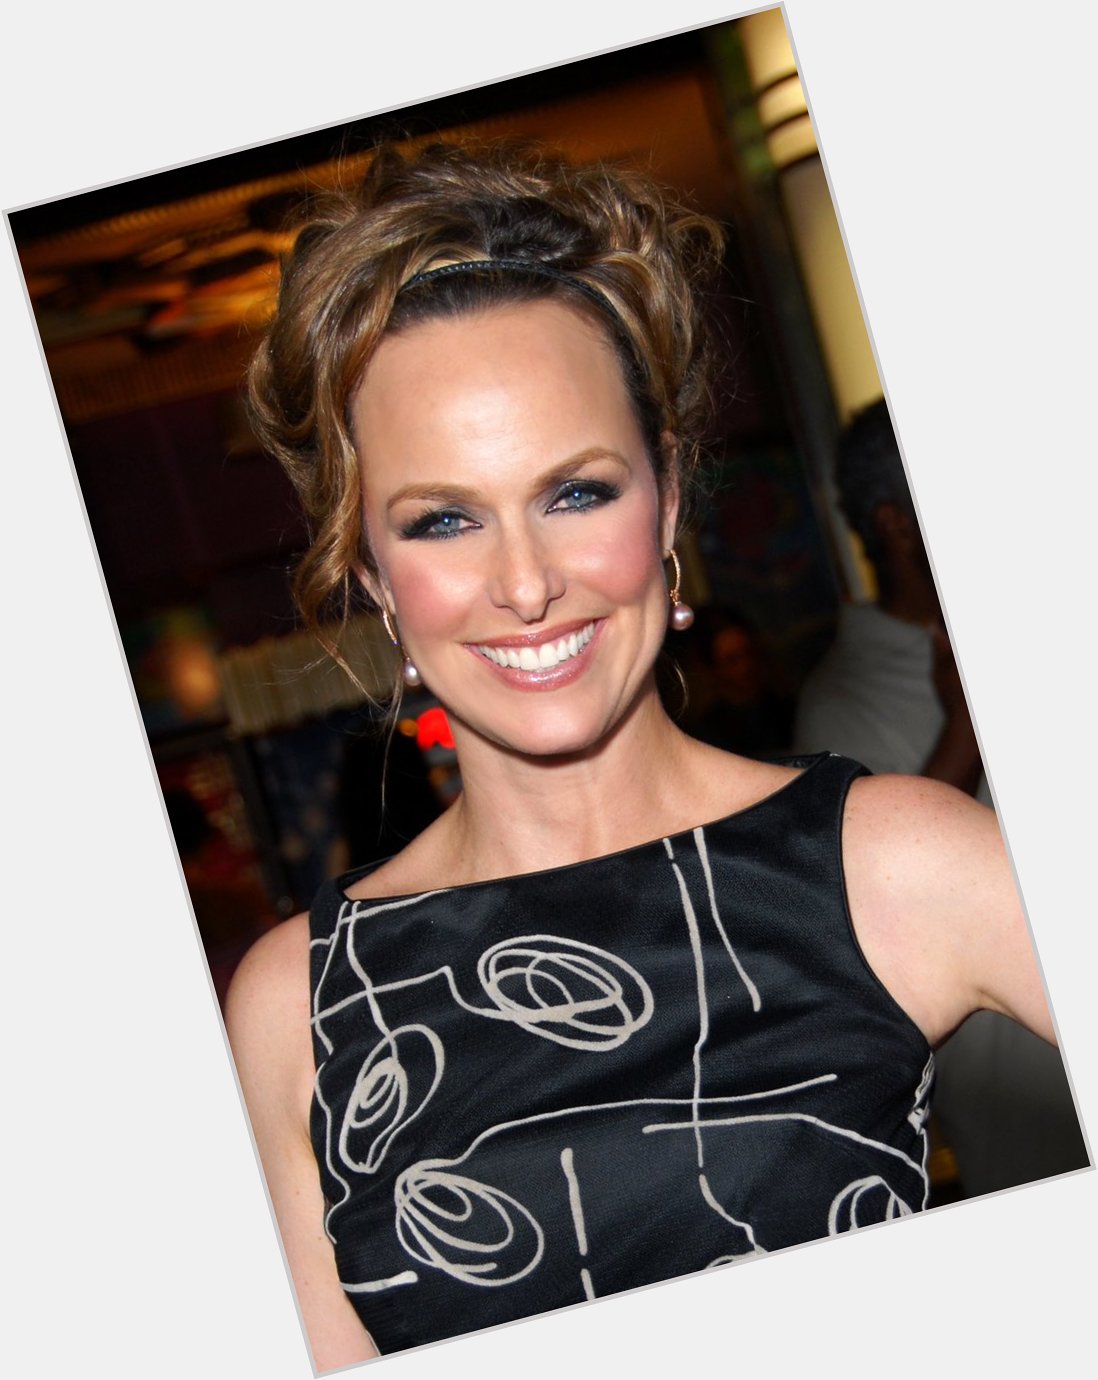 Happy Birthday to Melora Hardin! 

Do you recognize her from anything you ve watched? 